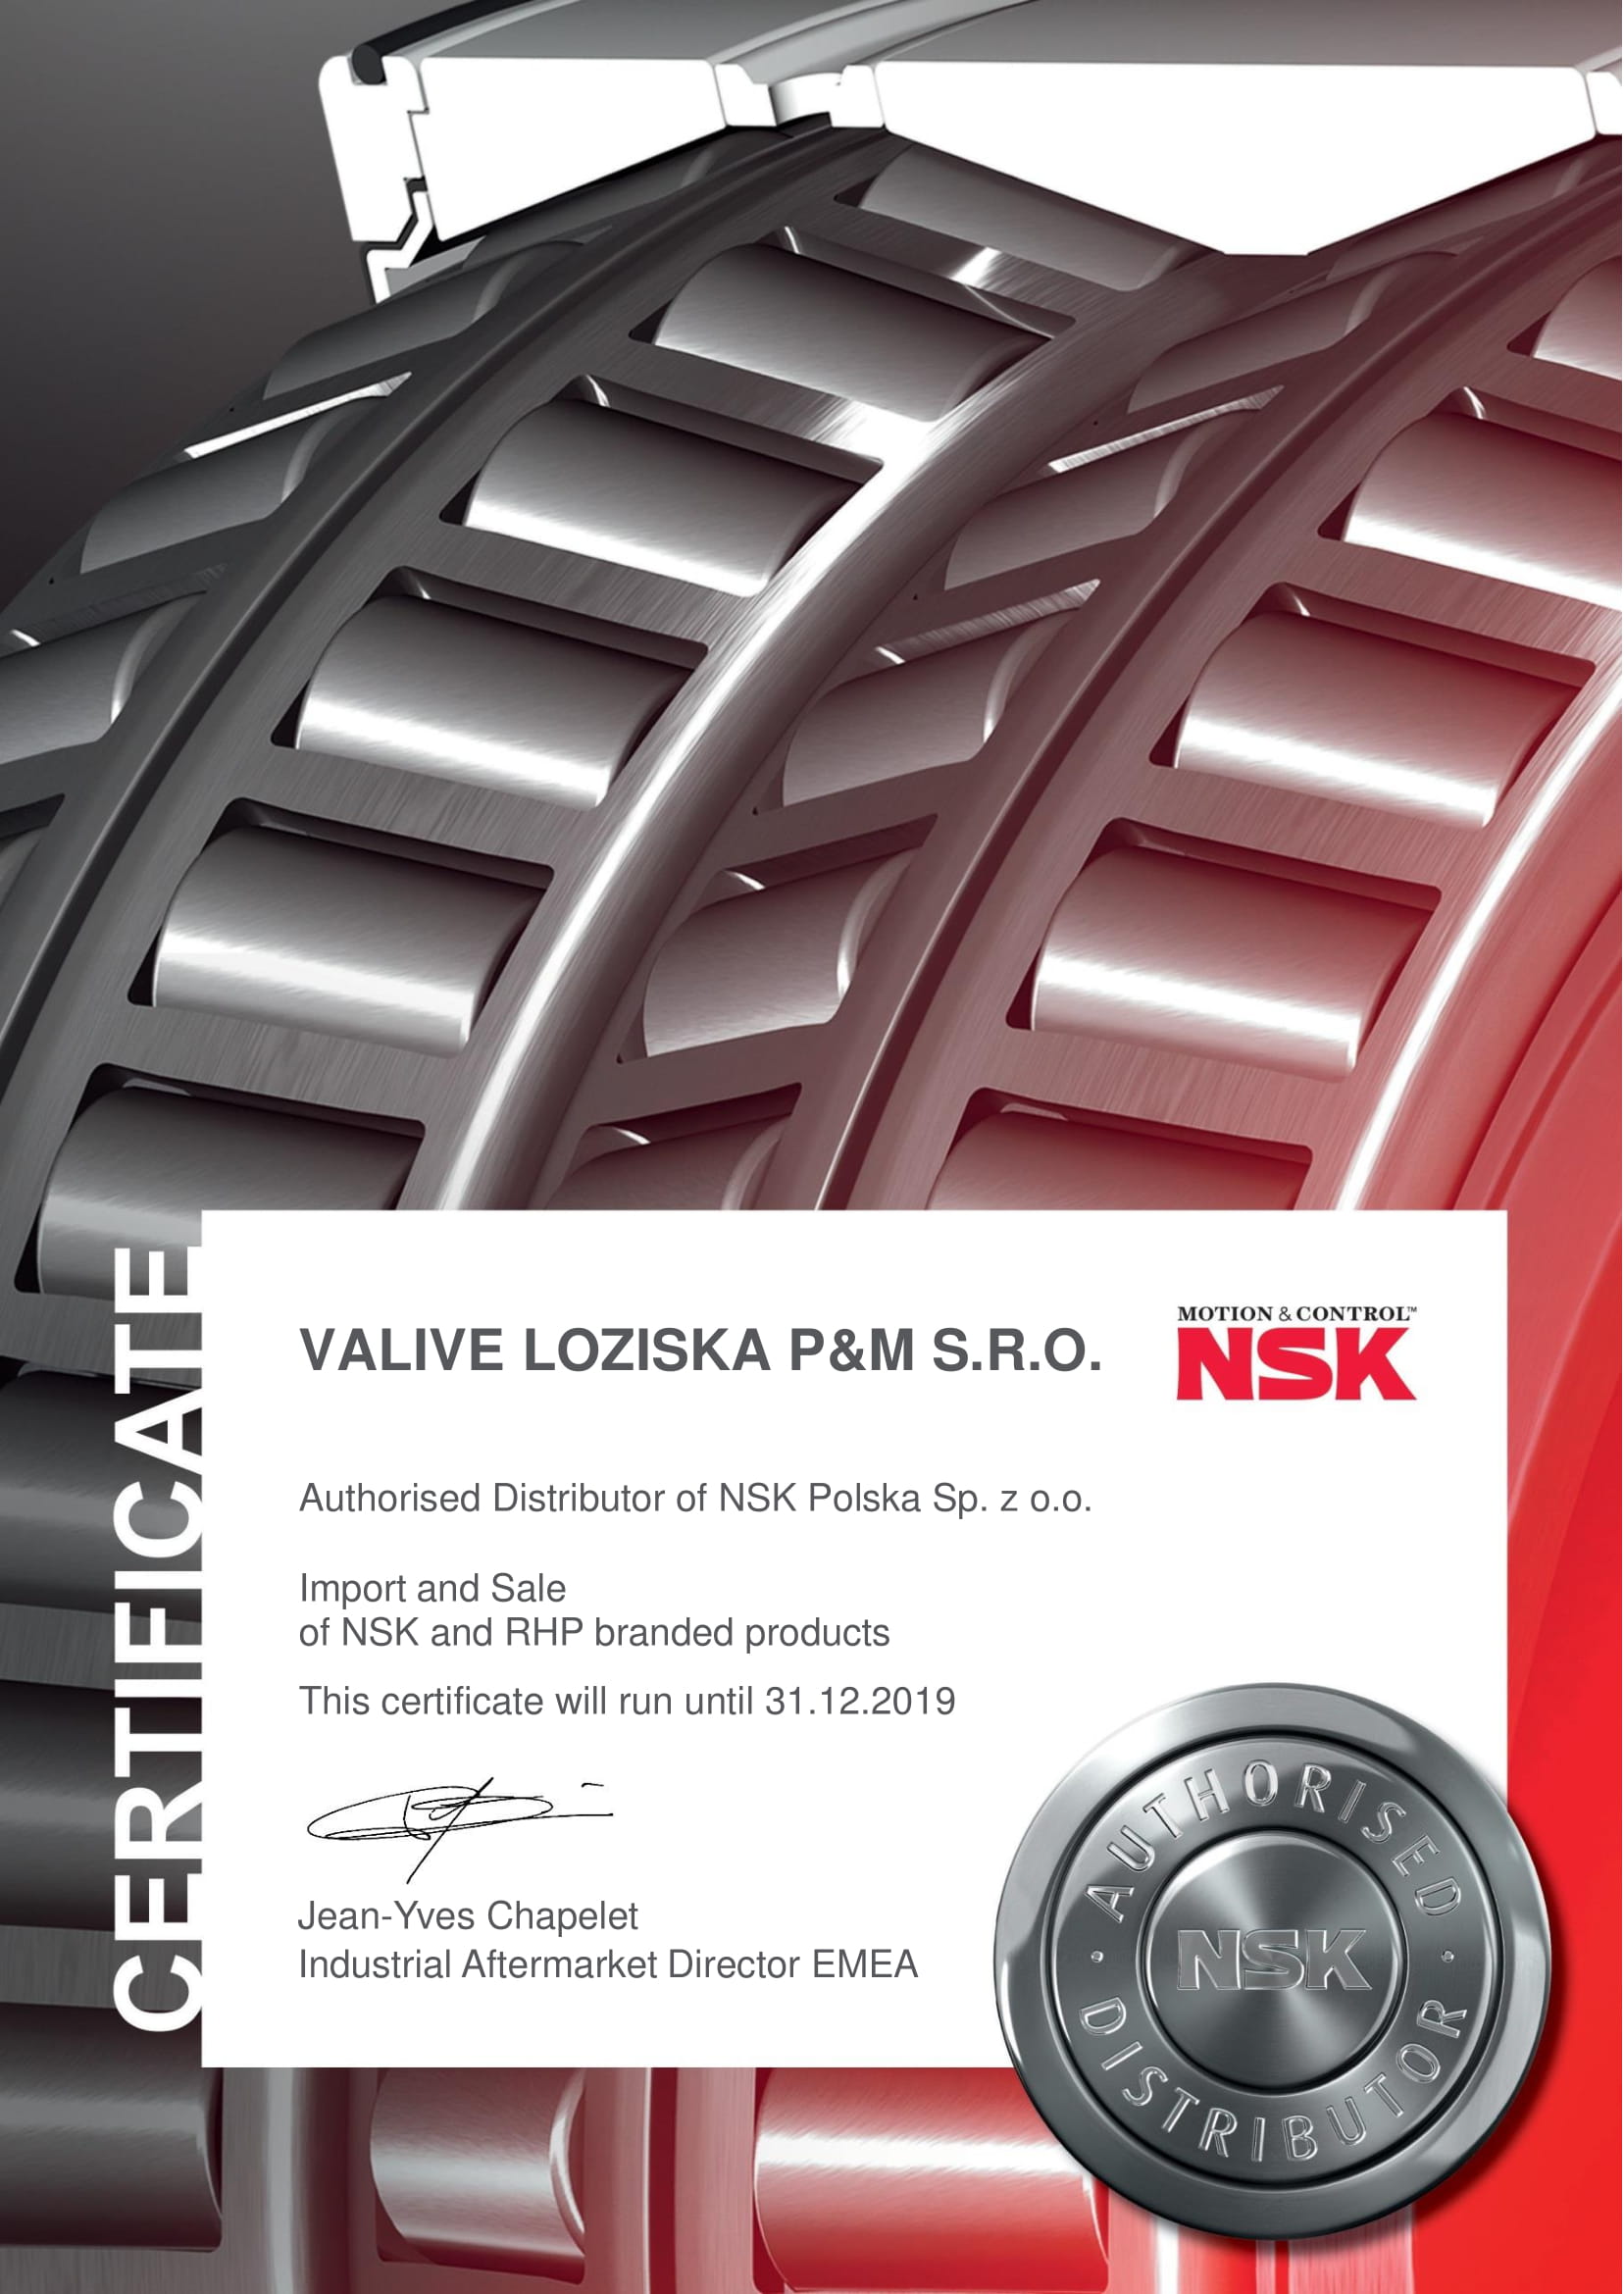 Certificate authorised distributor of NSK